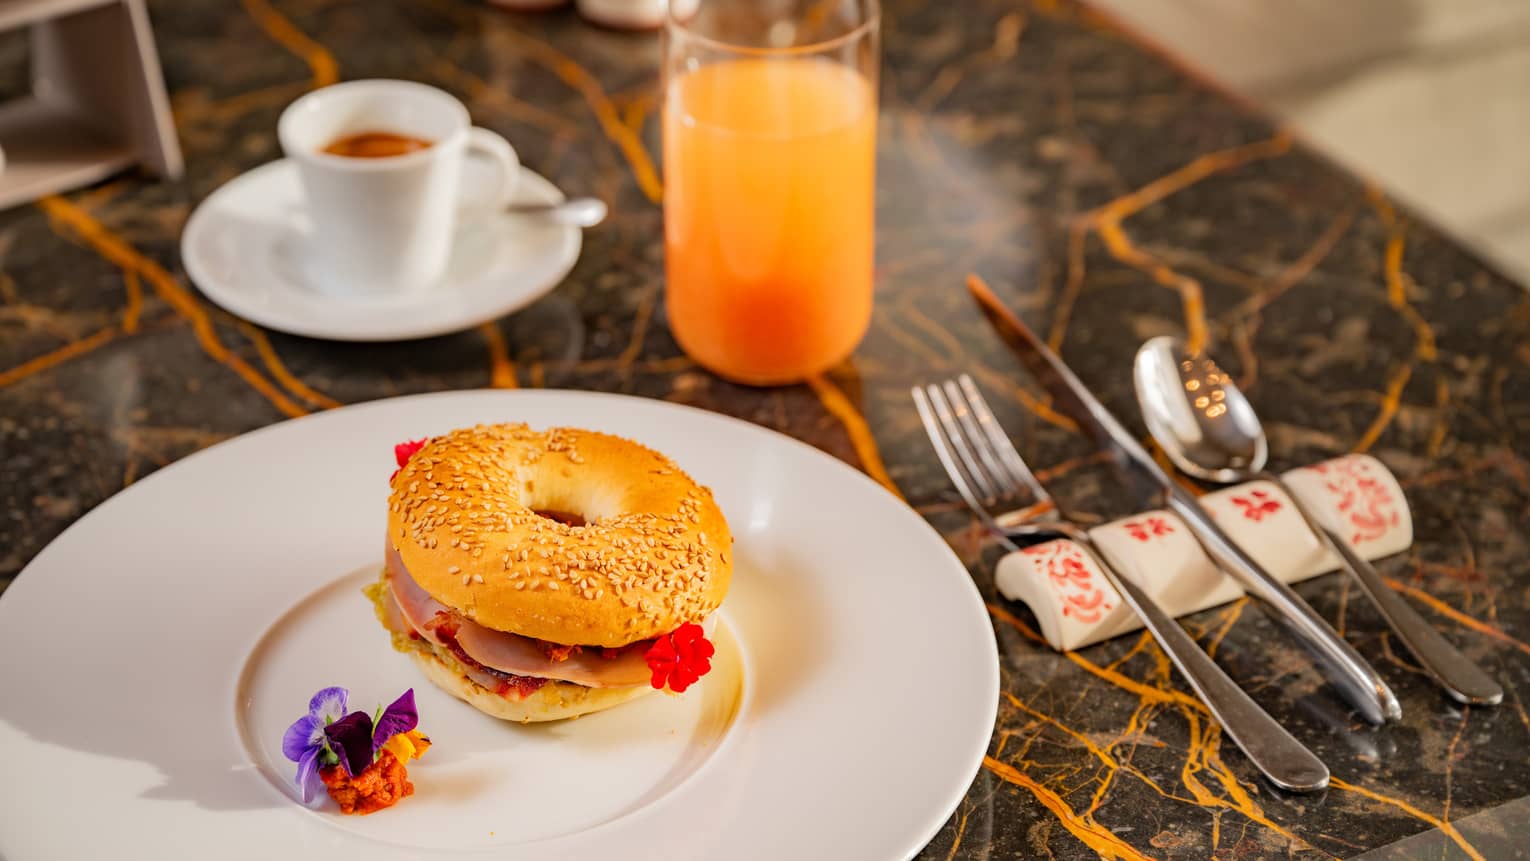 Sicilian bagel with sesame seeds on white plate with flower garnish beside flatware, cup of espresso and glass of juice,Sicilian bagel with sesame seeds on white plate with flower garnish beside flatware, cup of espresso and glass of juice